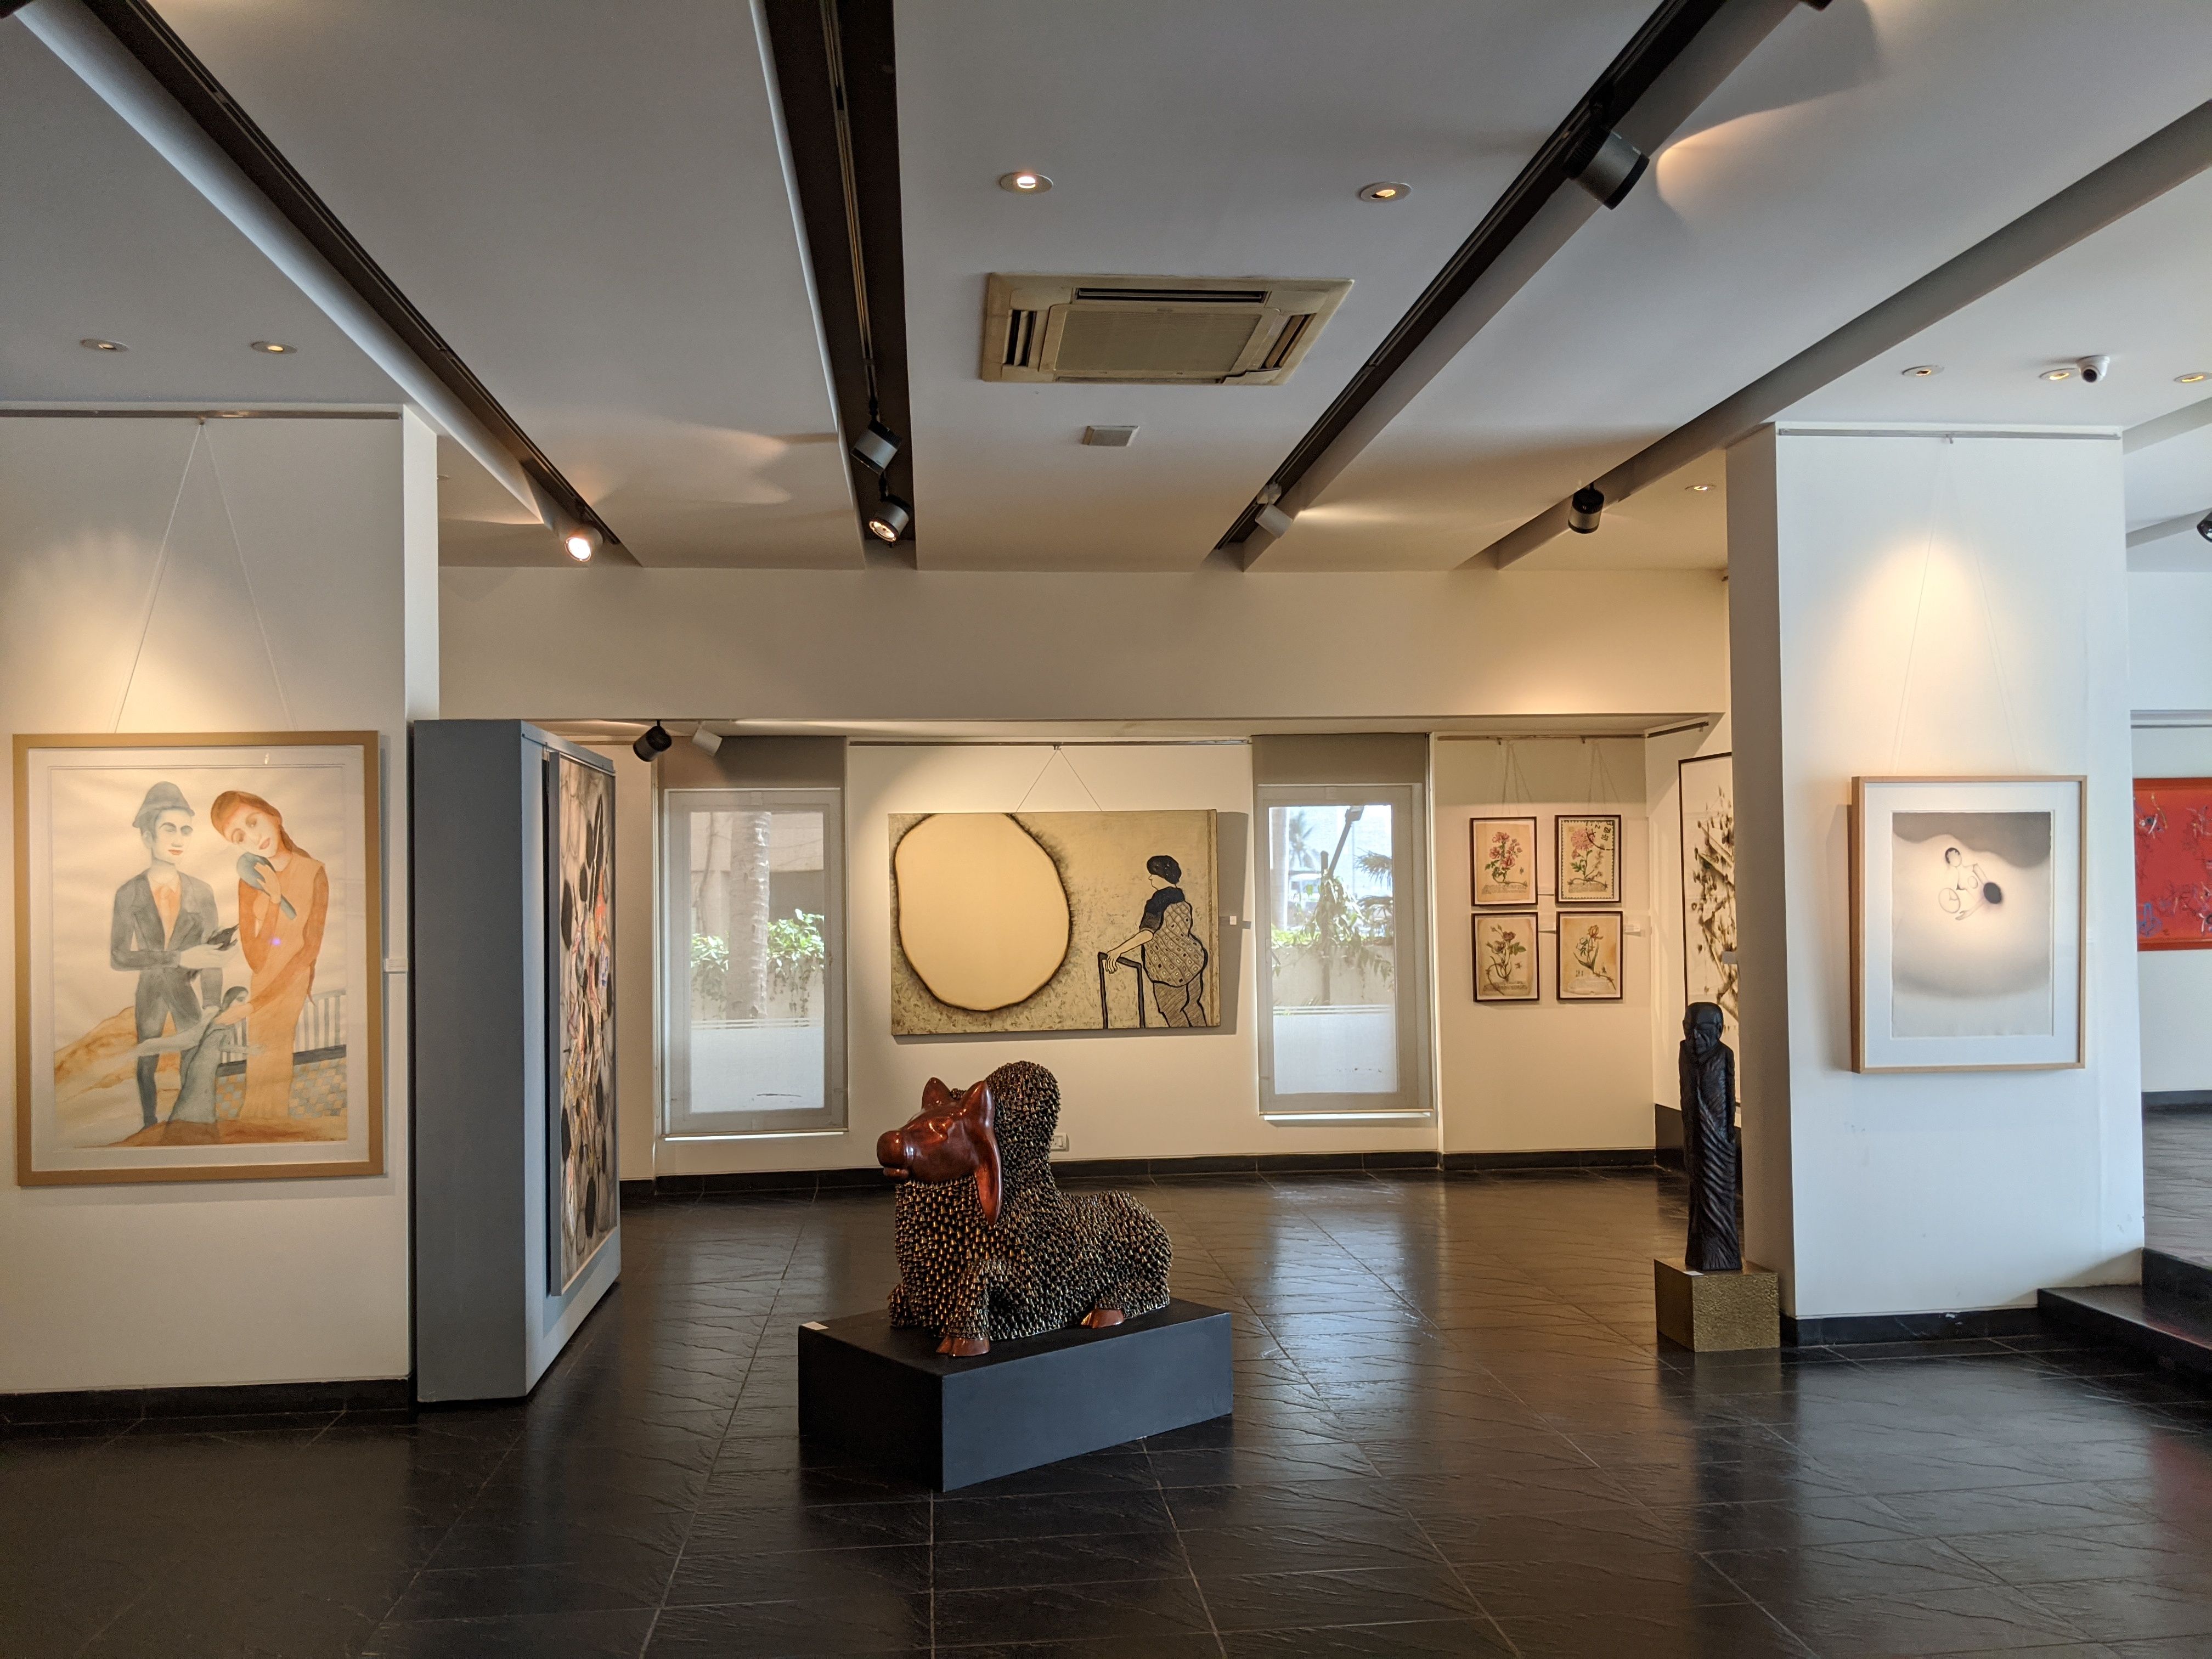 Tao Art Gallery - Related Collections